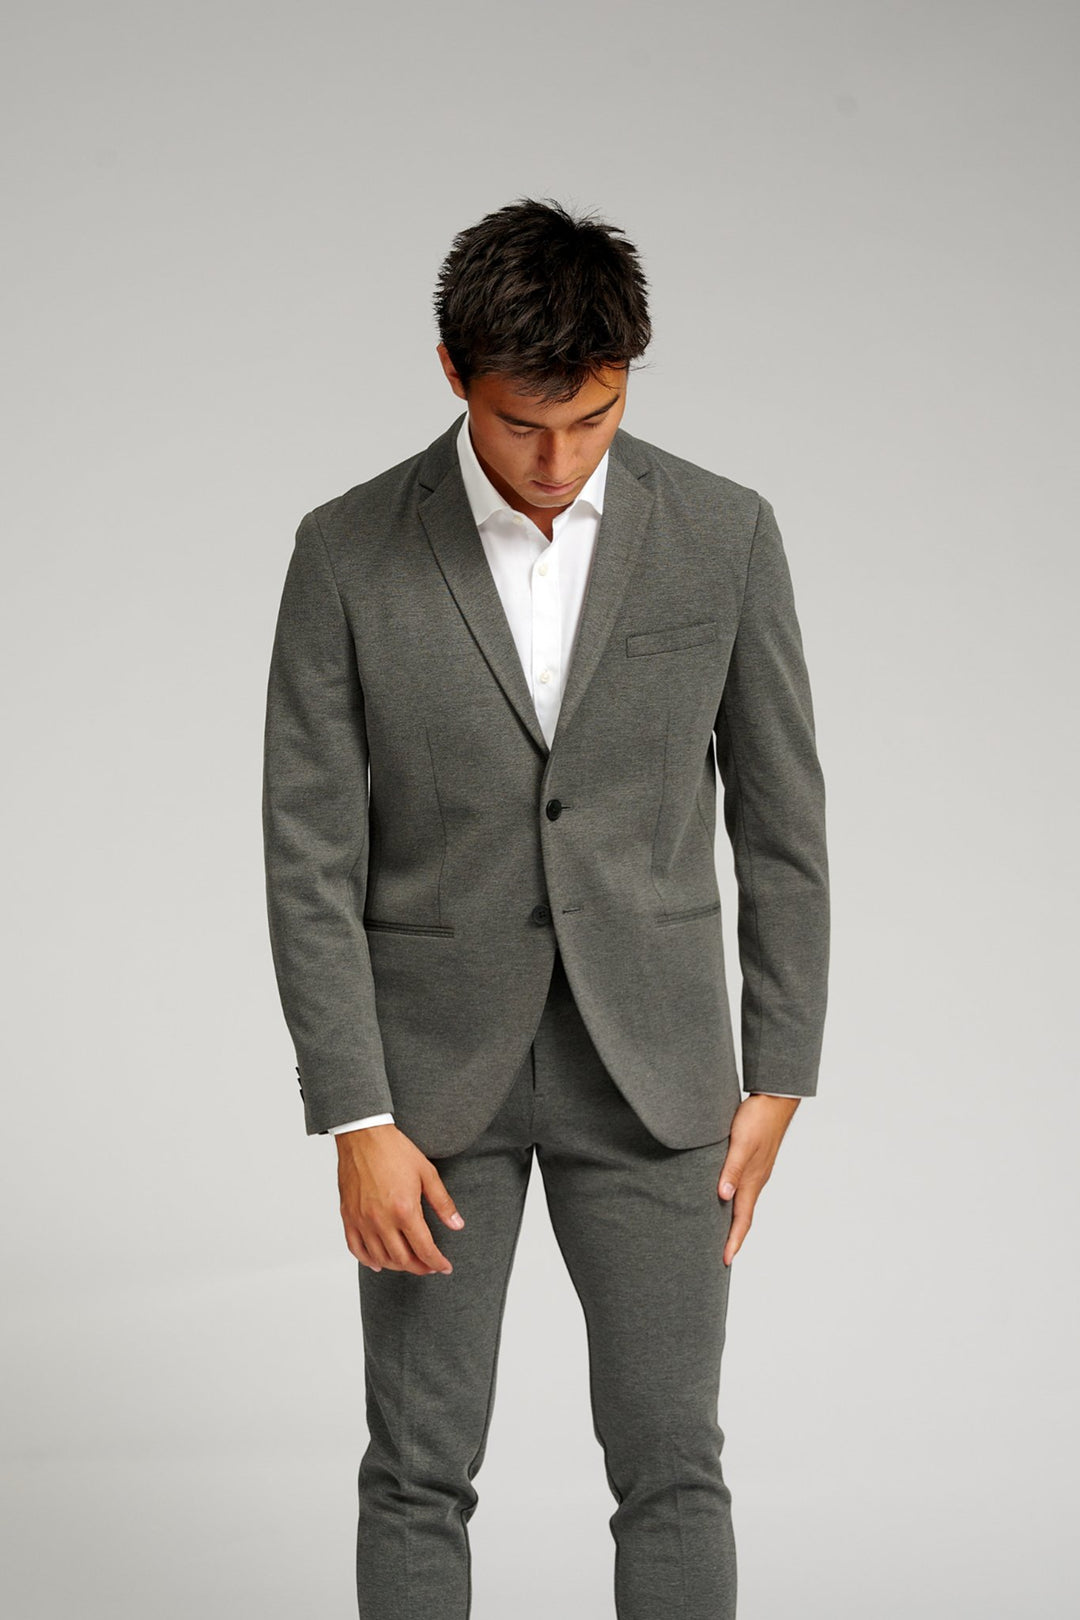 {"alt"=>"Must-Have Clothing for Every Gentleman", "class"=>"object-cover w-full h-full max-w-[650px]", "loading"=>"lazy"}